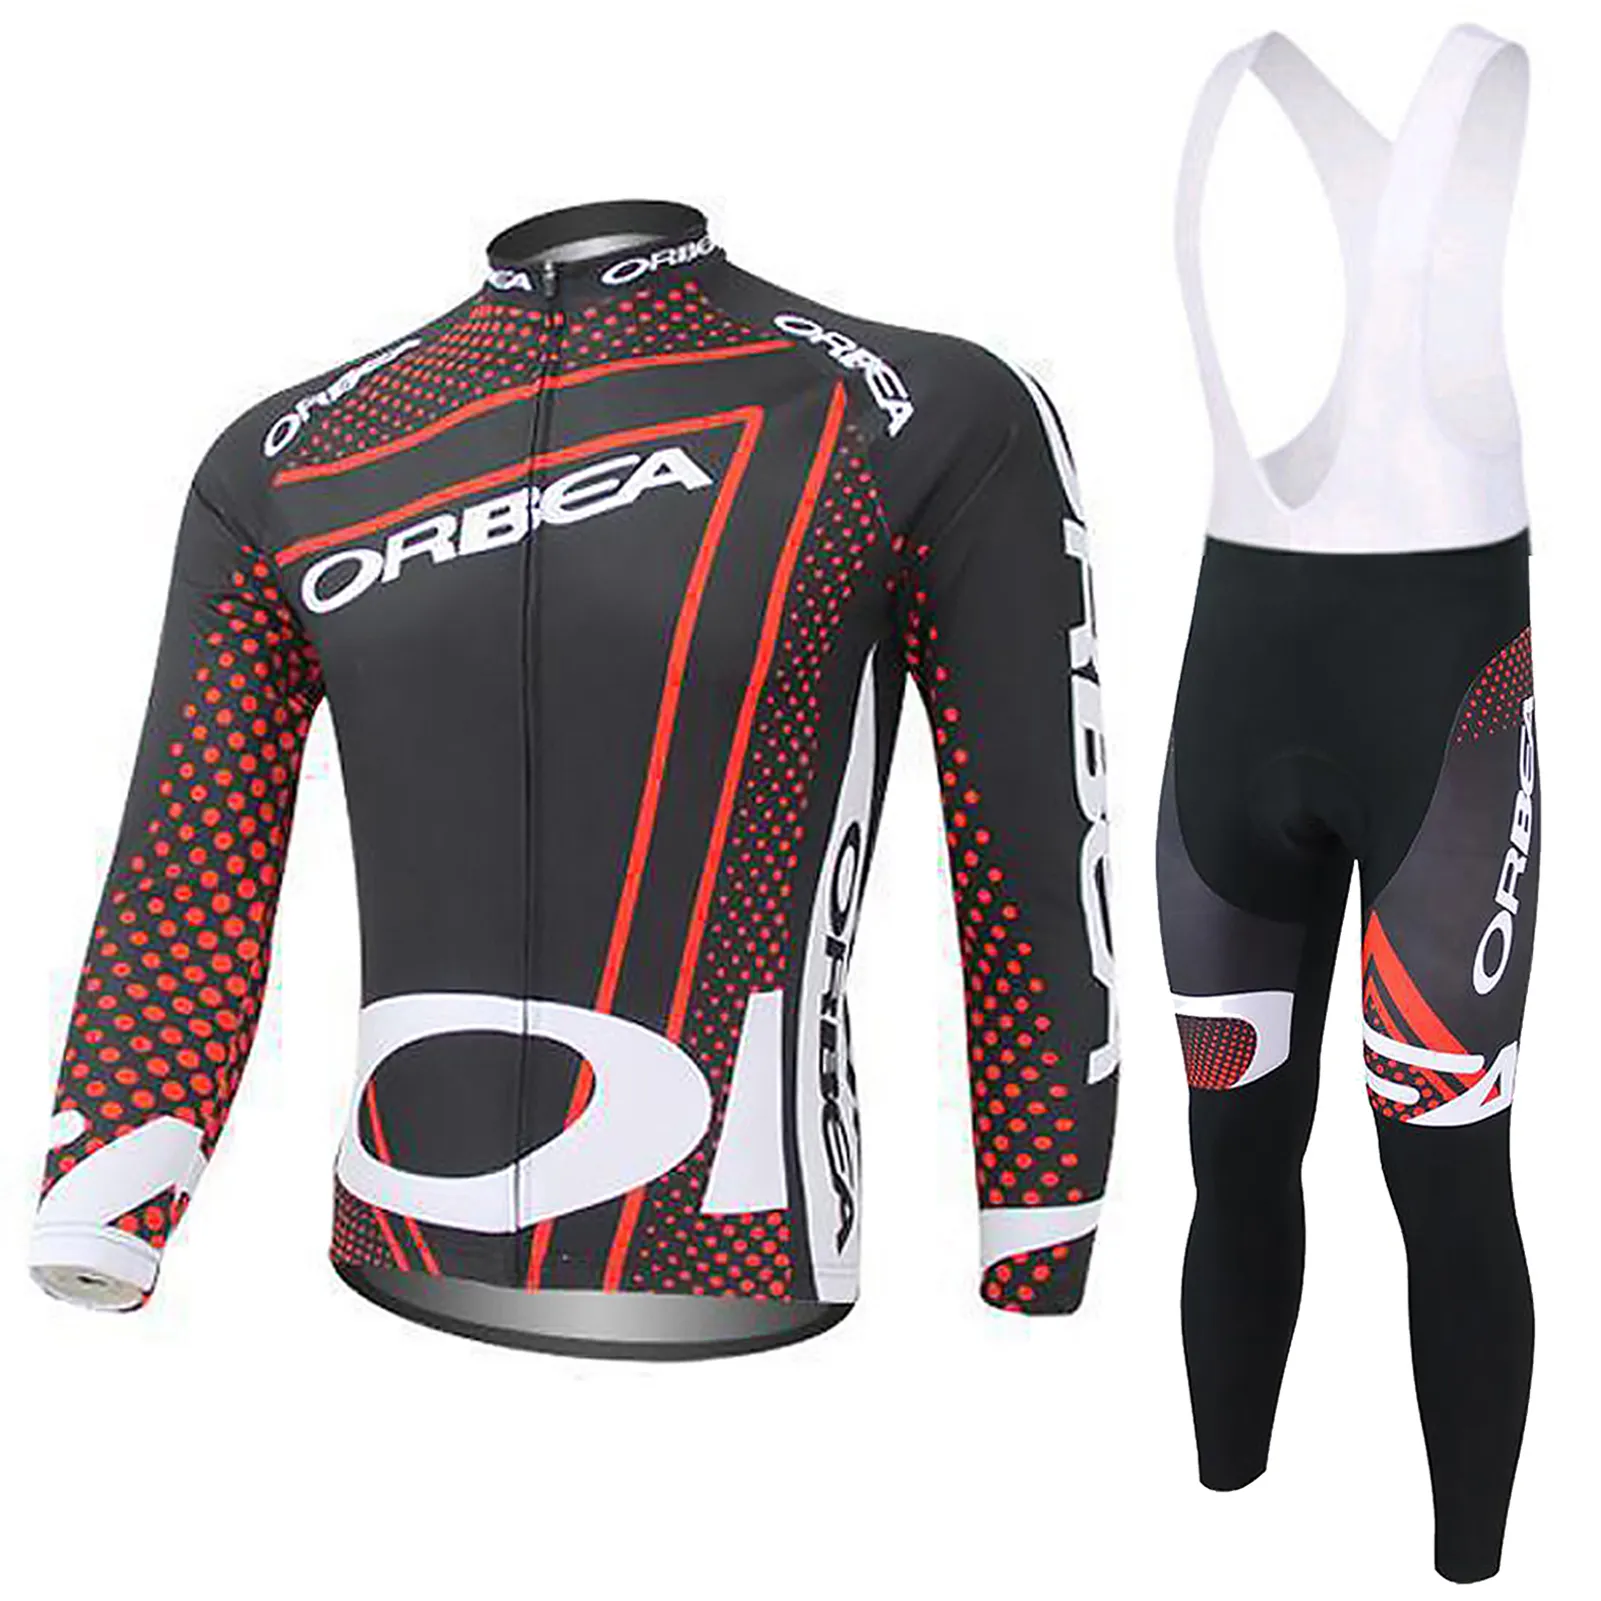 Mens's Cycling Jersey Sets ORBEA Bicycle Bike Long Sleeve Autumn Winter Fleece Jersey With 1 Free Cycling Sunglasses Color Random